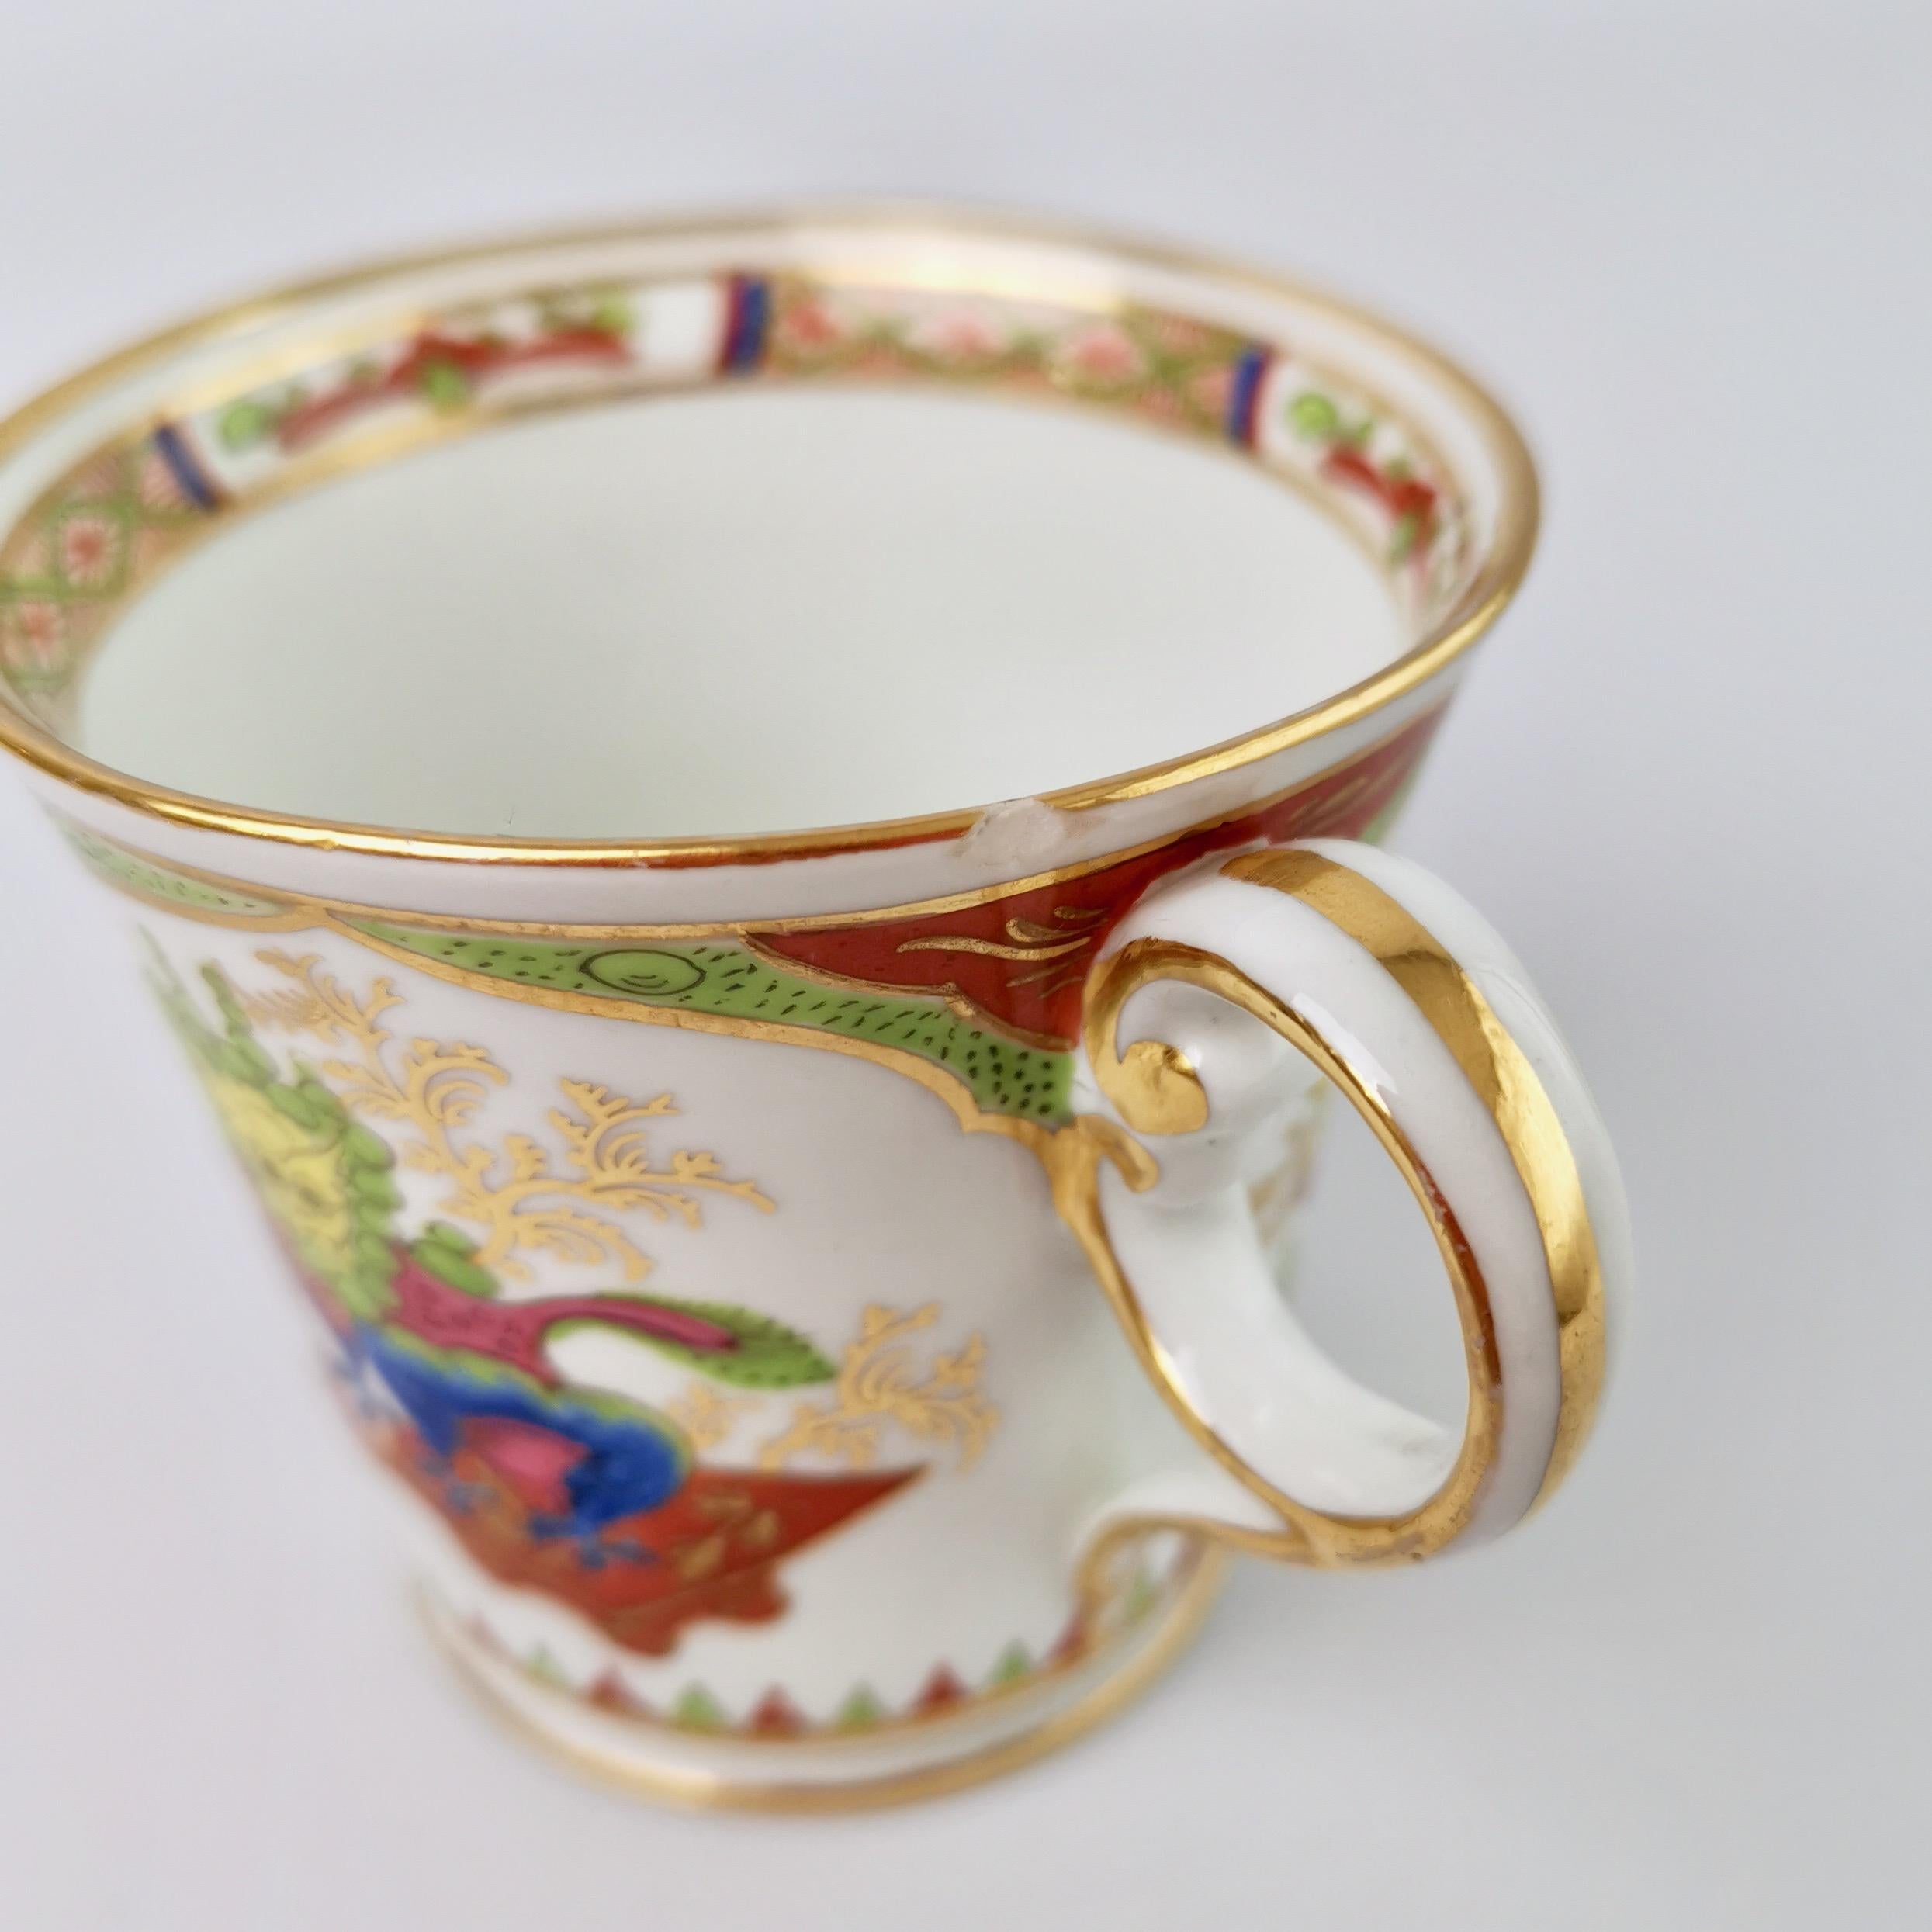 Chamberlain's Worcester Orphaned Porcelain Coffee Cup, Dragons, circa 1810 2